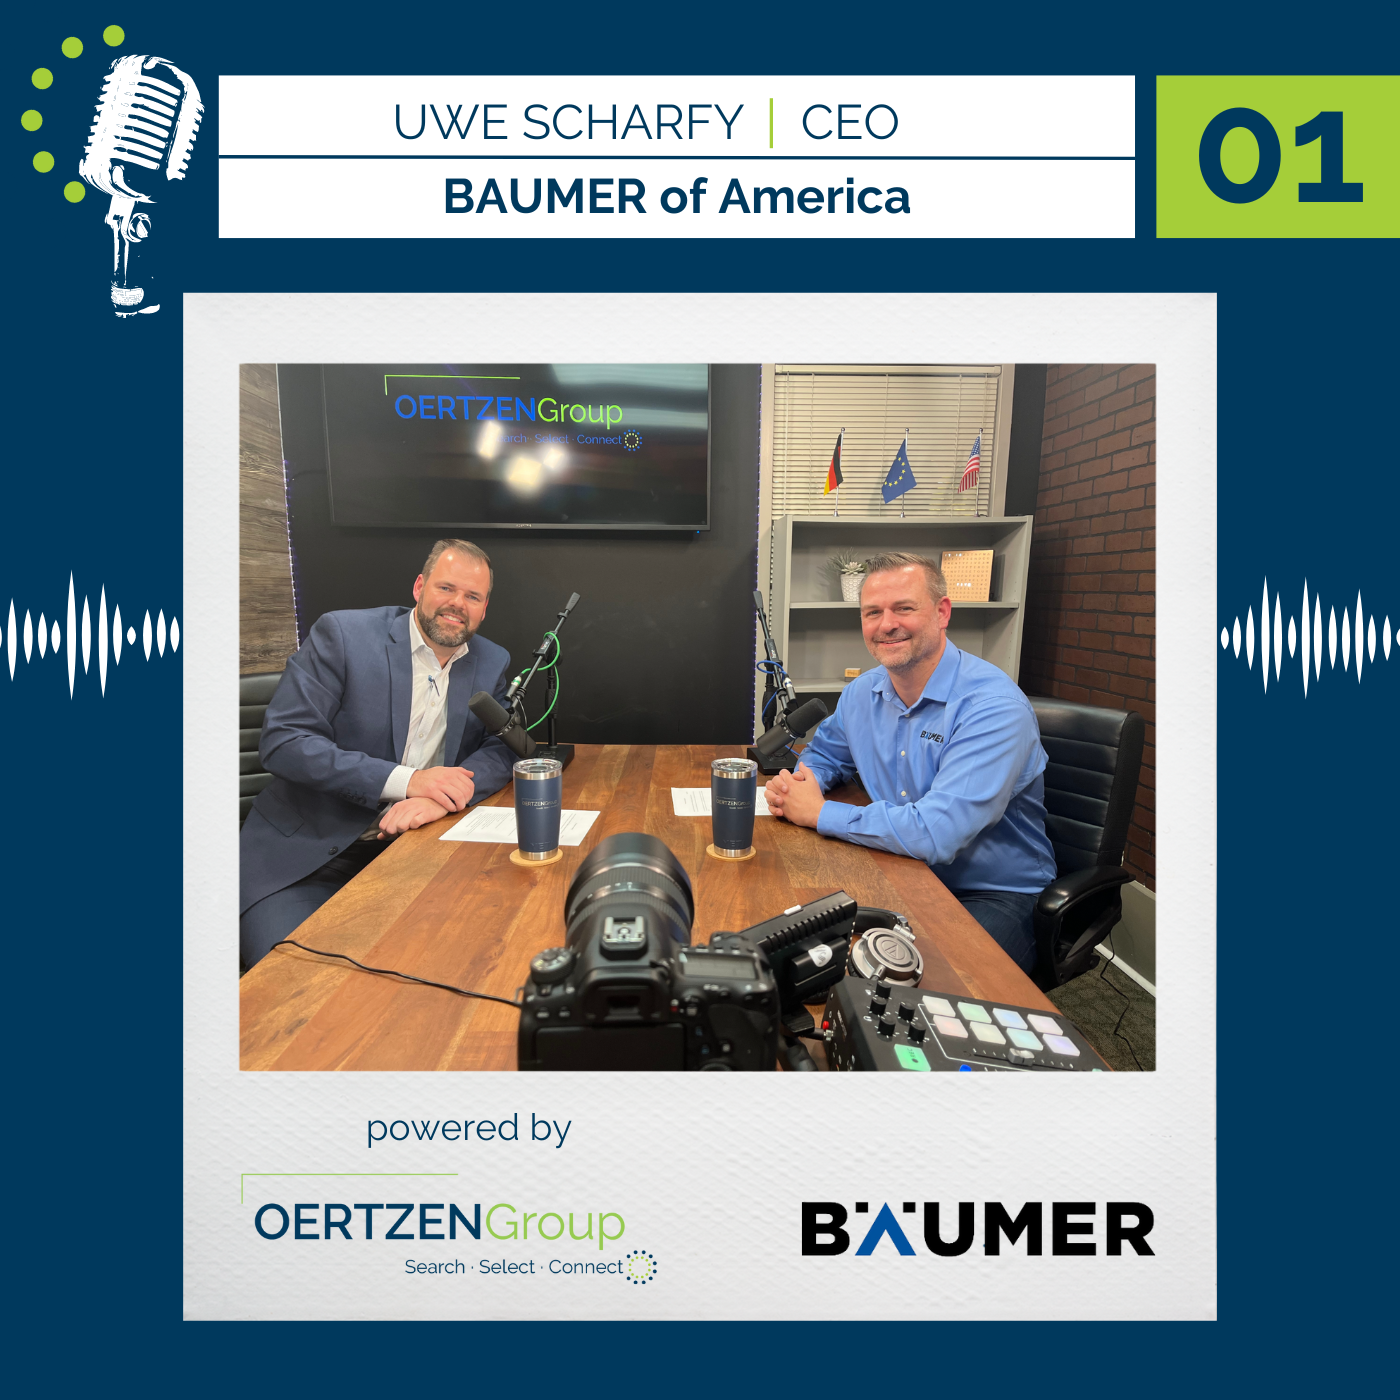 01 - With Uwe Scharfy, CEO of Baumer of America